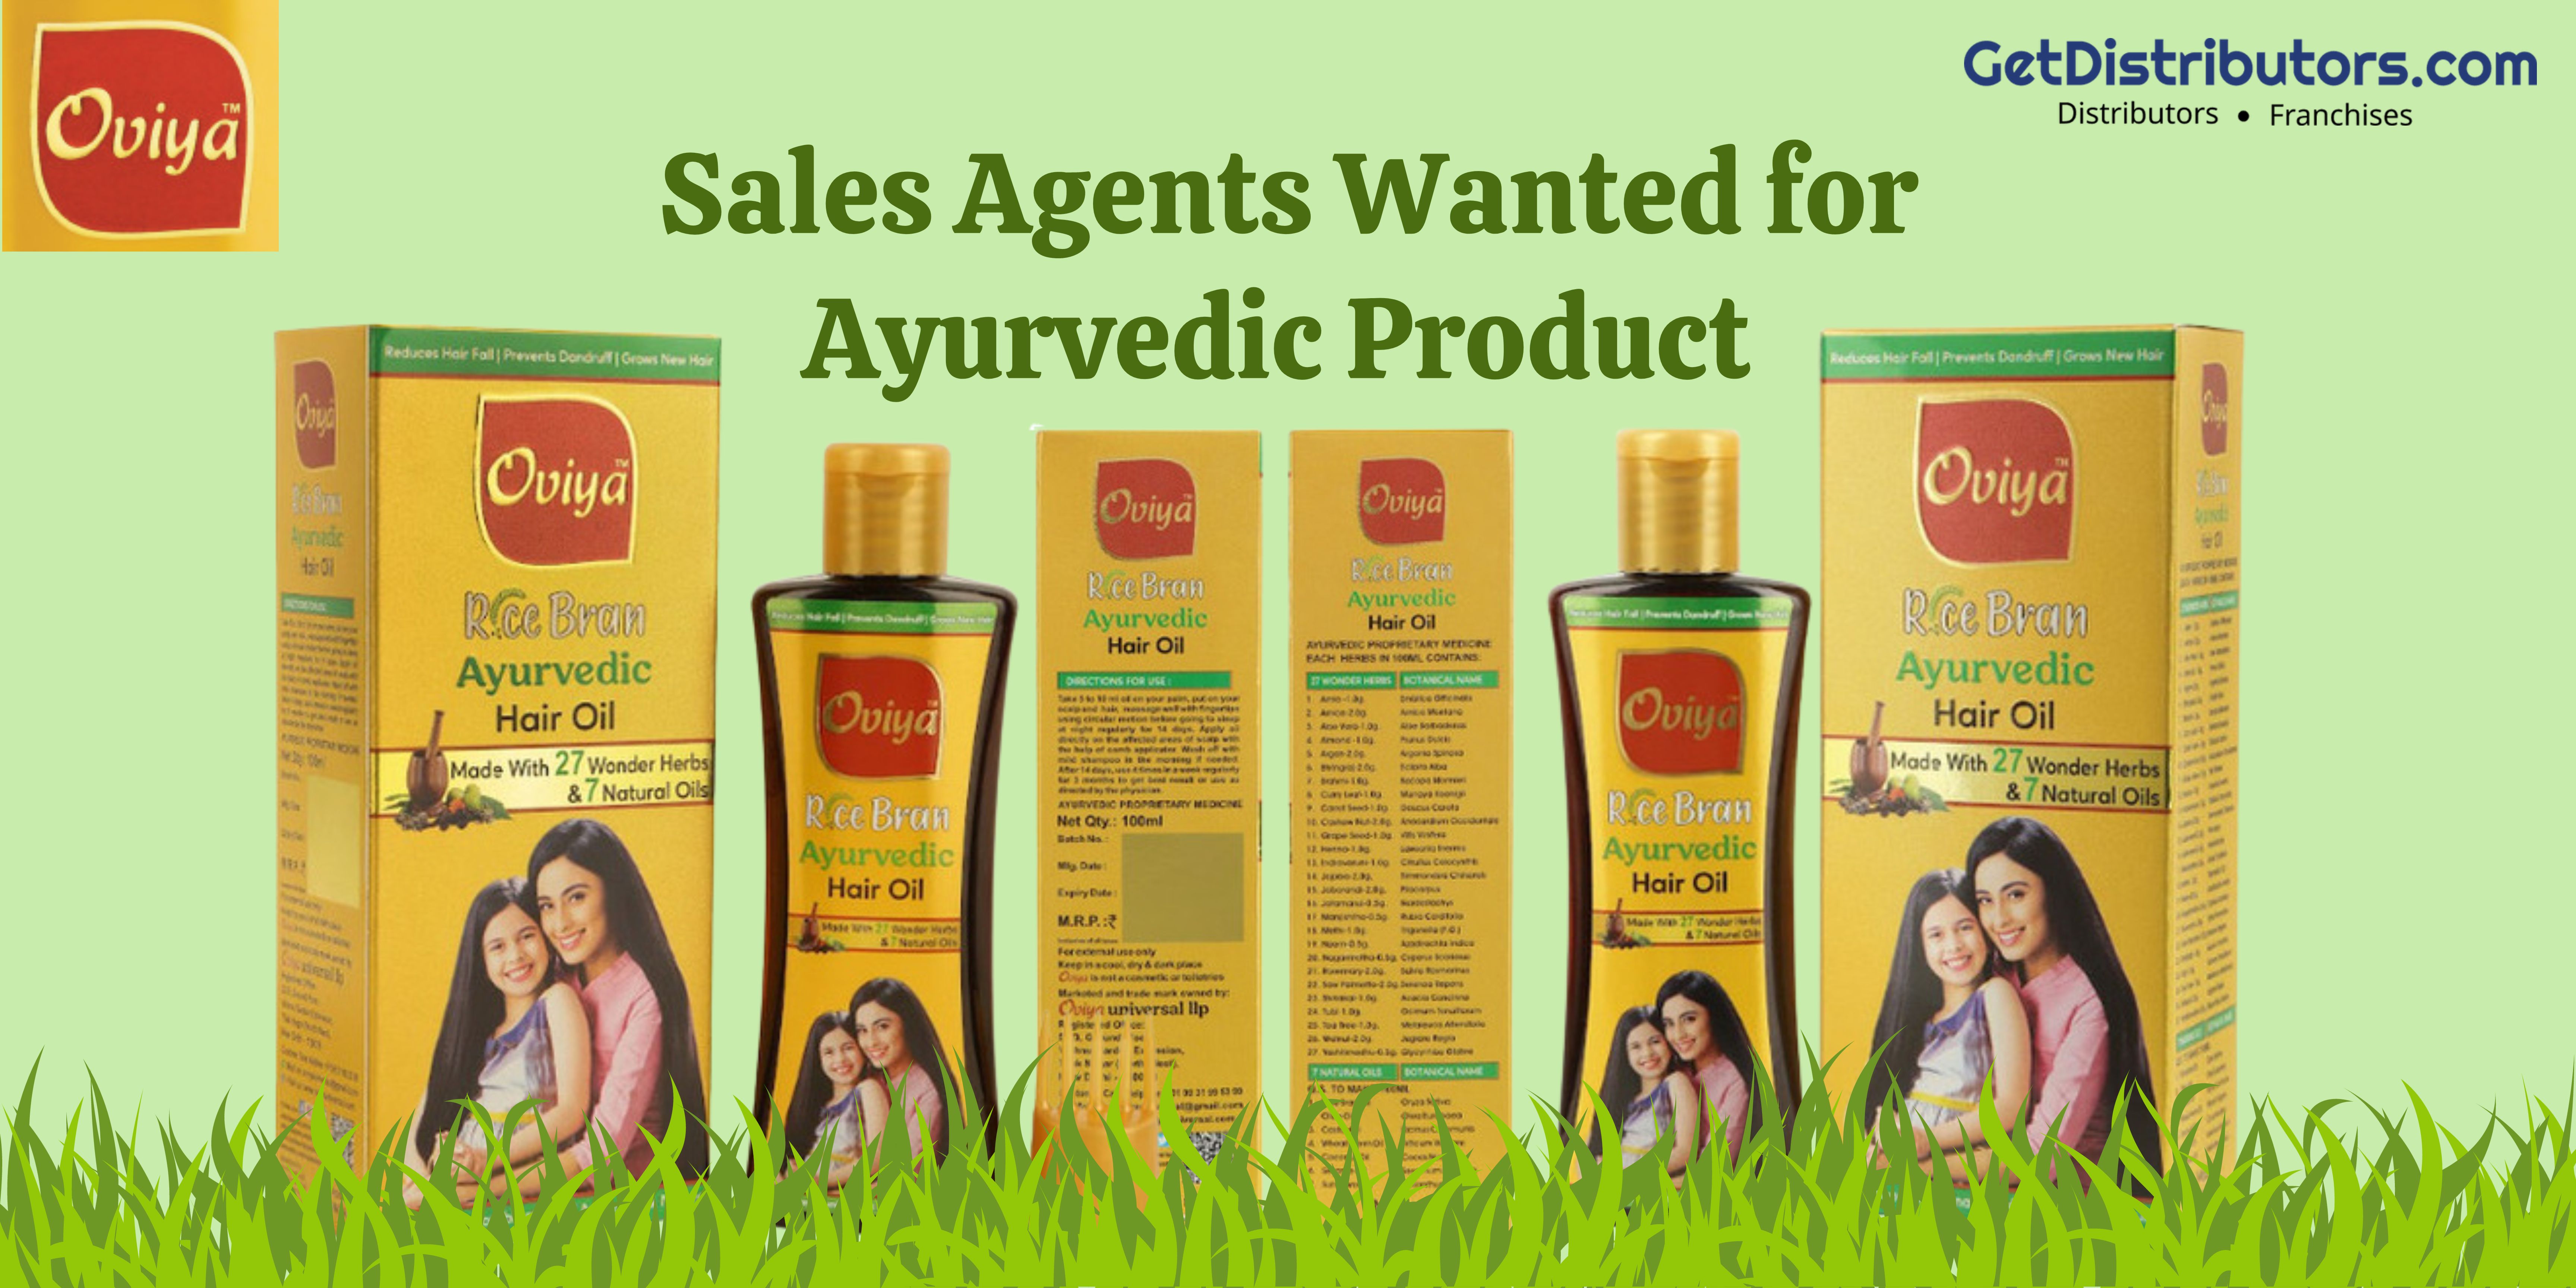 Sales Agents Wanted for Oviya Universal LLP’s Ayurvedic Products!